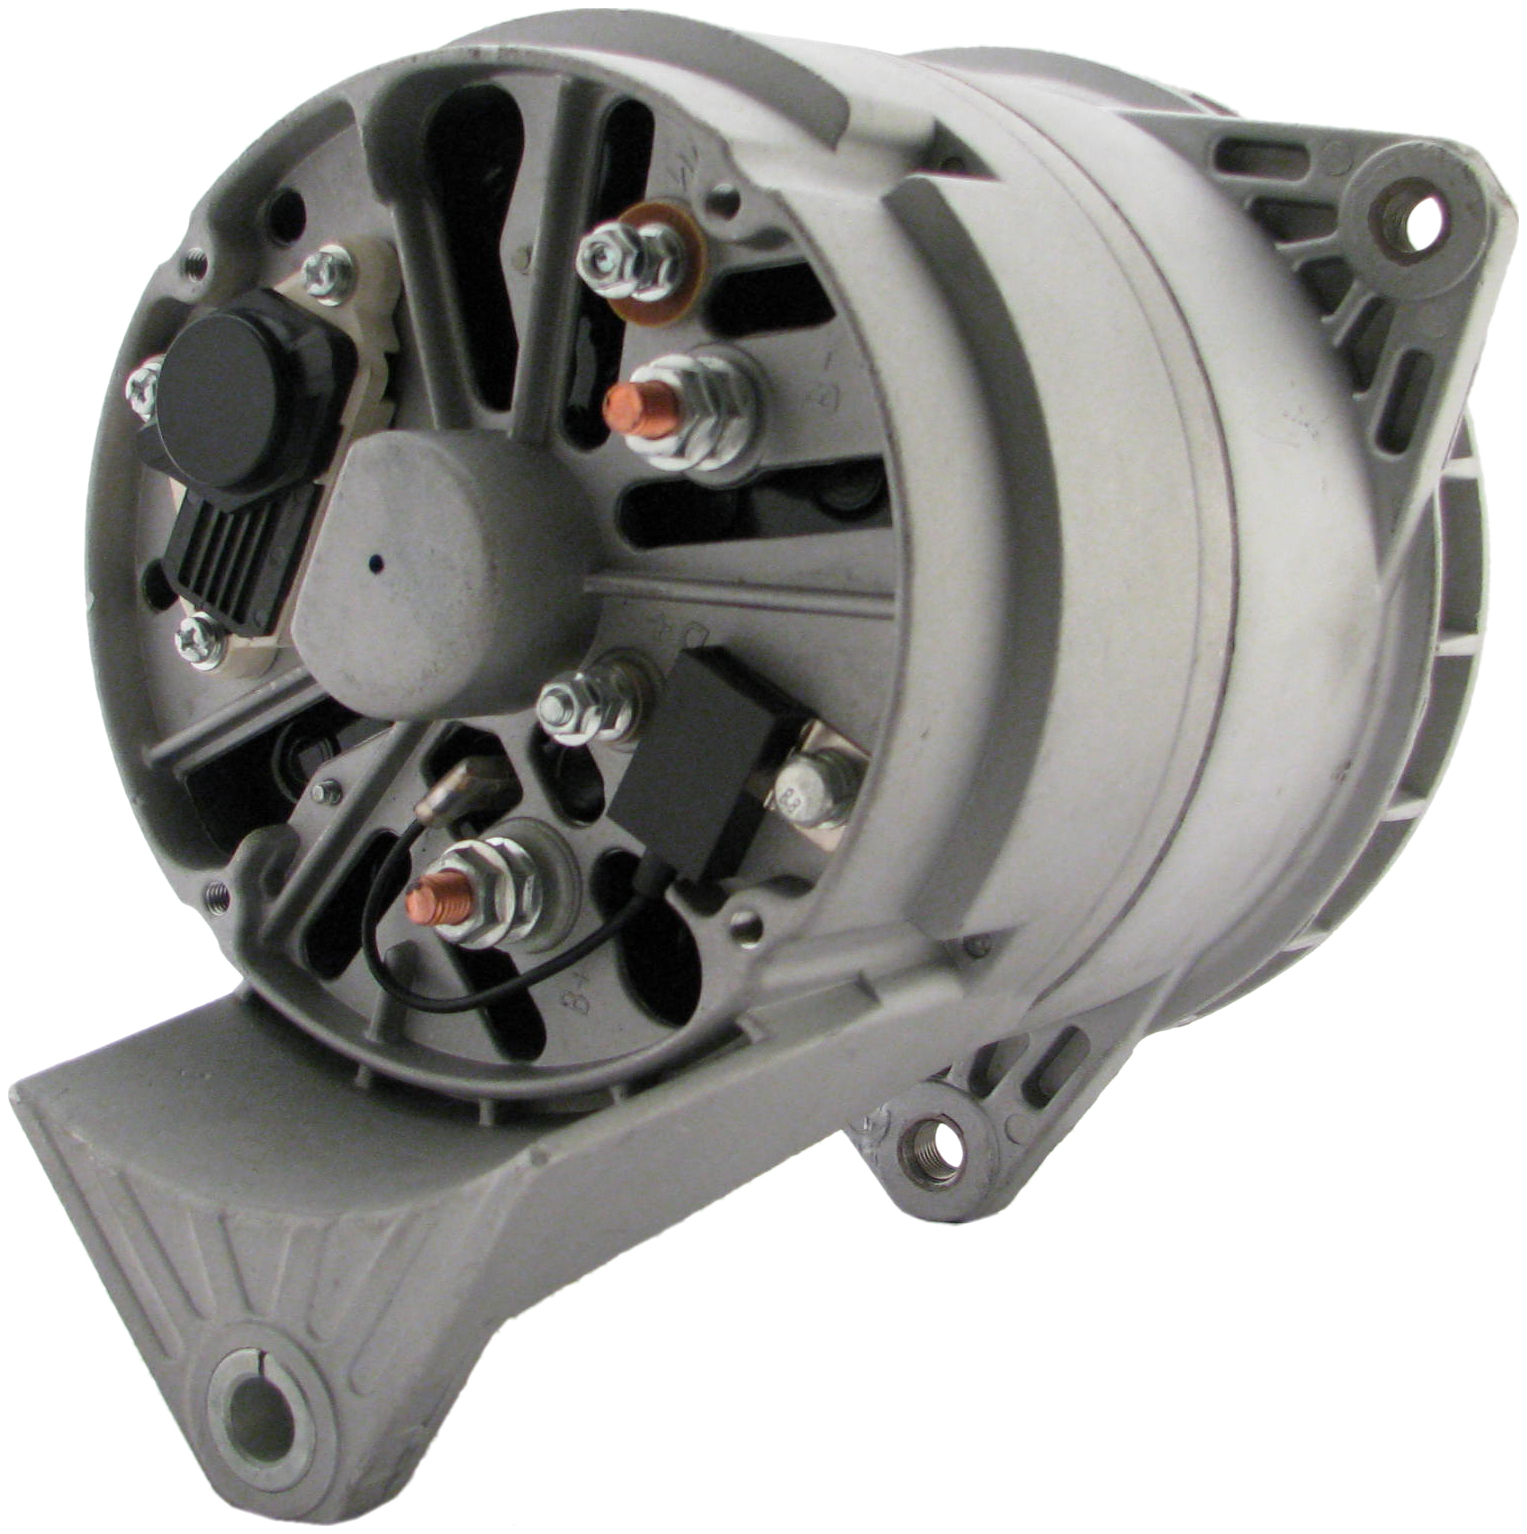 Rareelectrical NEW ALTERNATOR COMPATIBLE WITH DAF EUROPEAN HEAVY DUTY 75 95 240 300 VARIOUS ENGINES IA1001